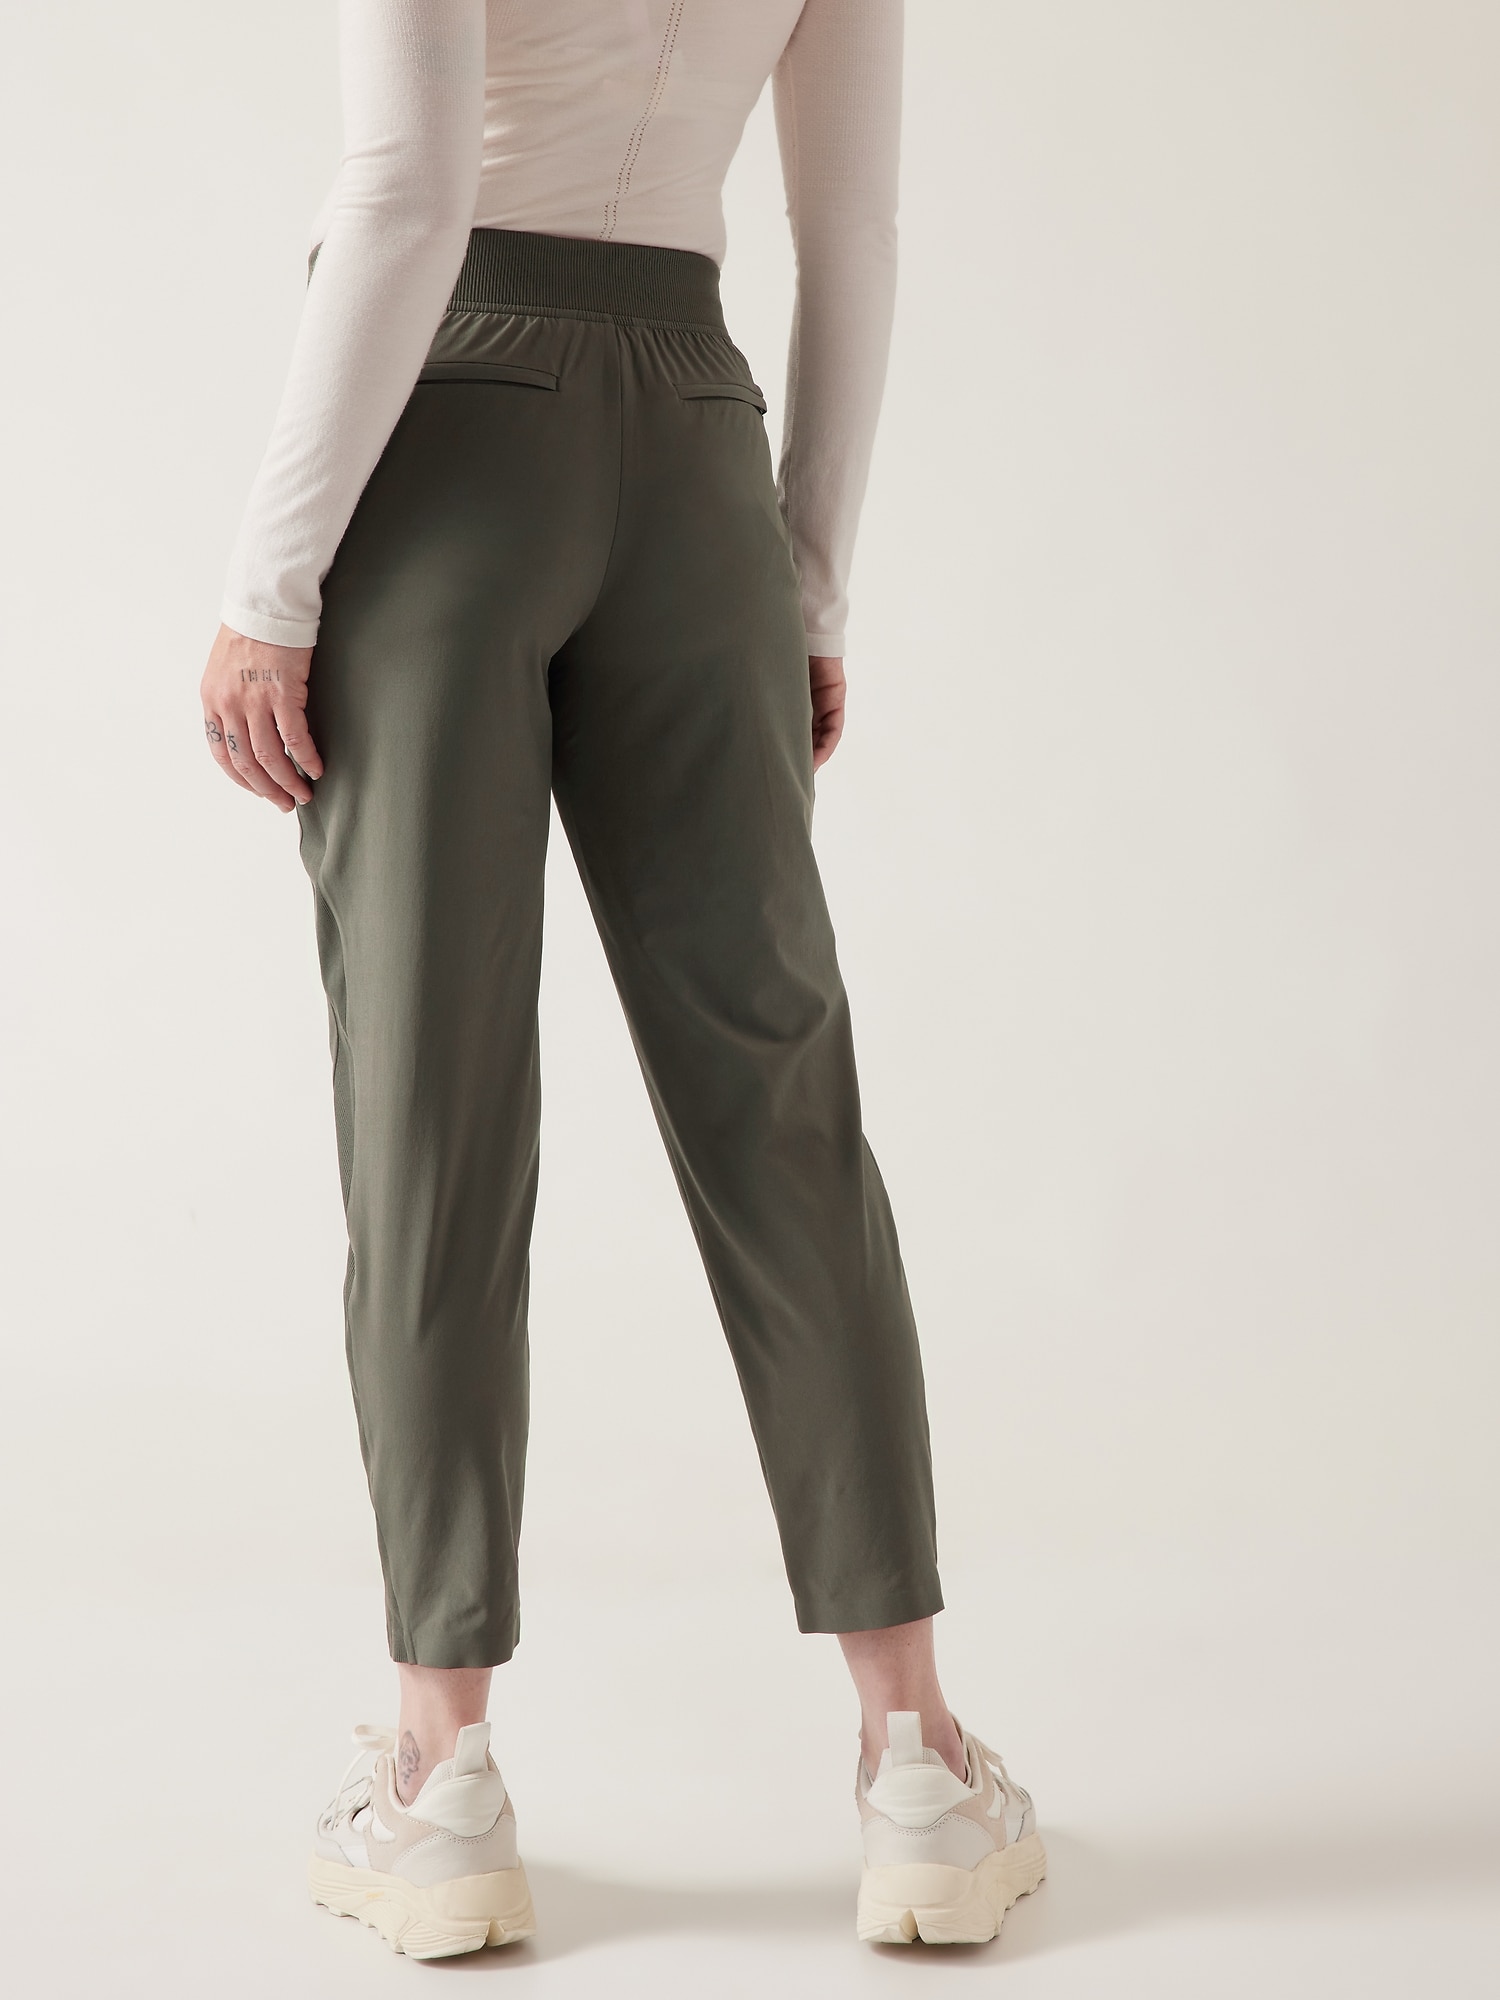 Athleta 4 (S SMALL) Brooklyn Ankle Pant, Mountain Olive CITY PANTS